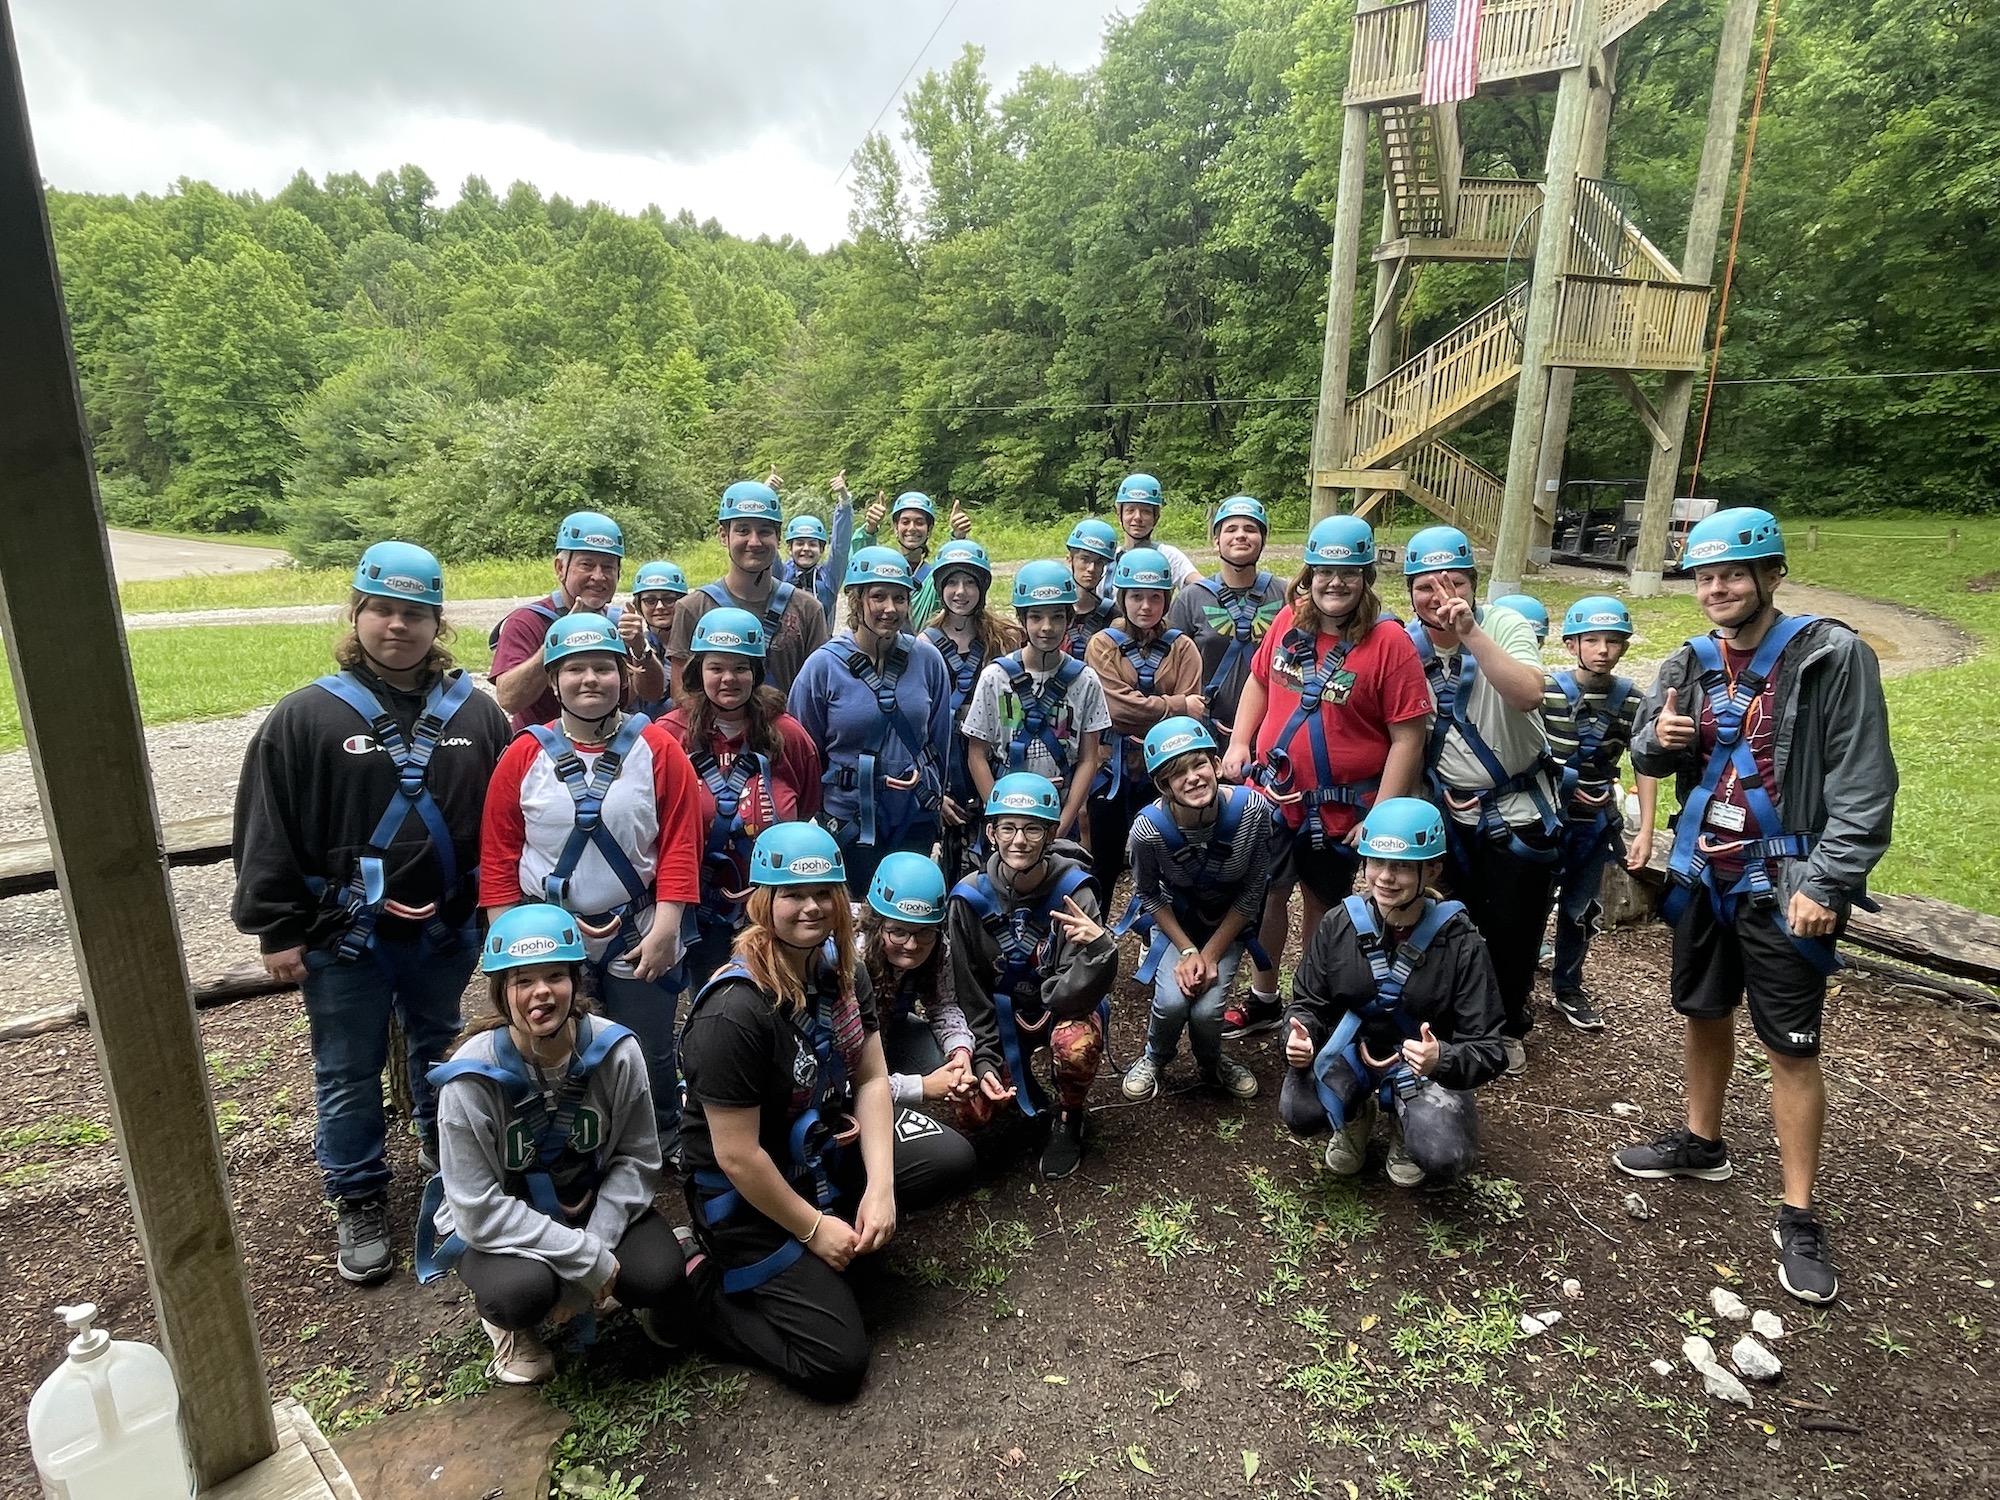 Campers pose together for a group picture in their zip-lining gear at Hocking Hills